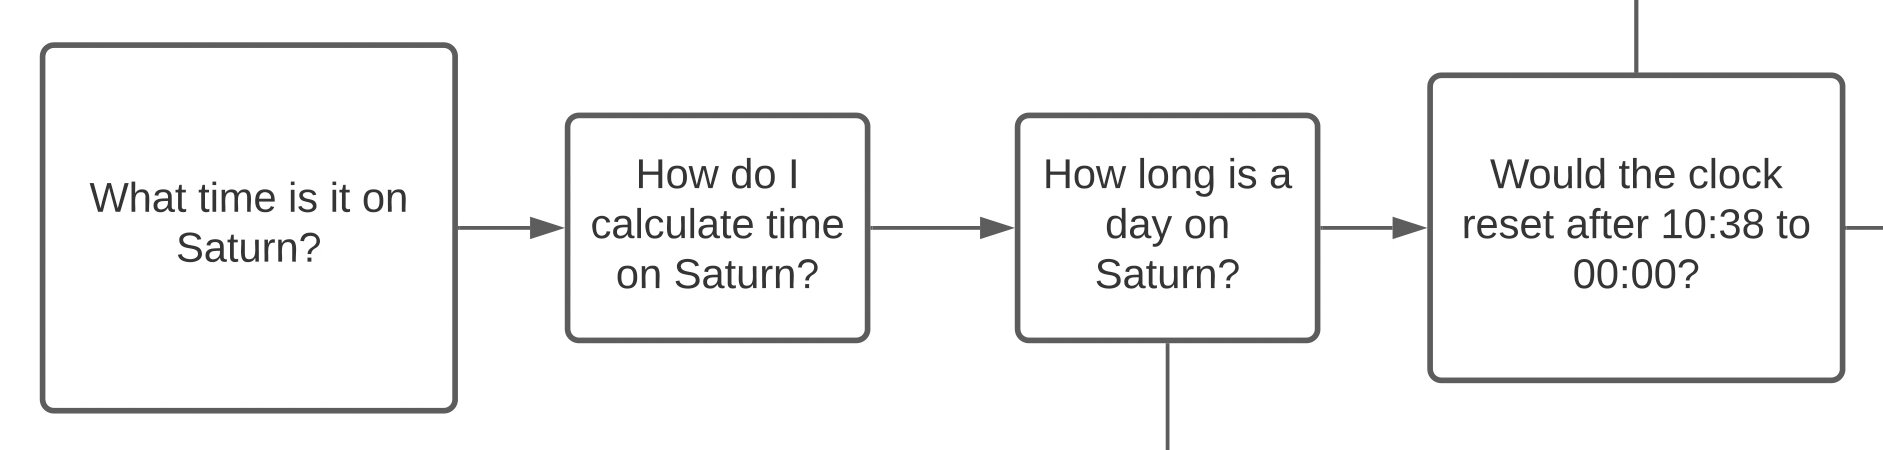 What Time is it on Saturn_end 2.jpg